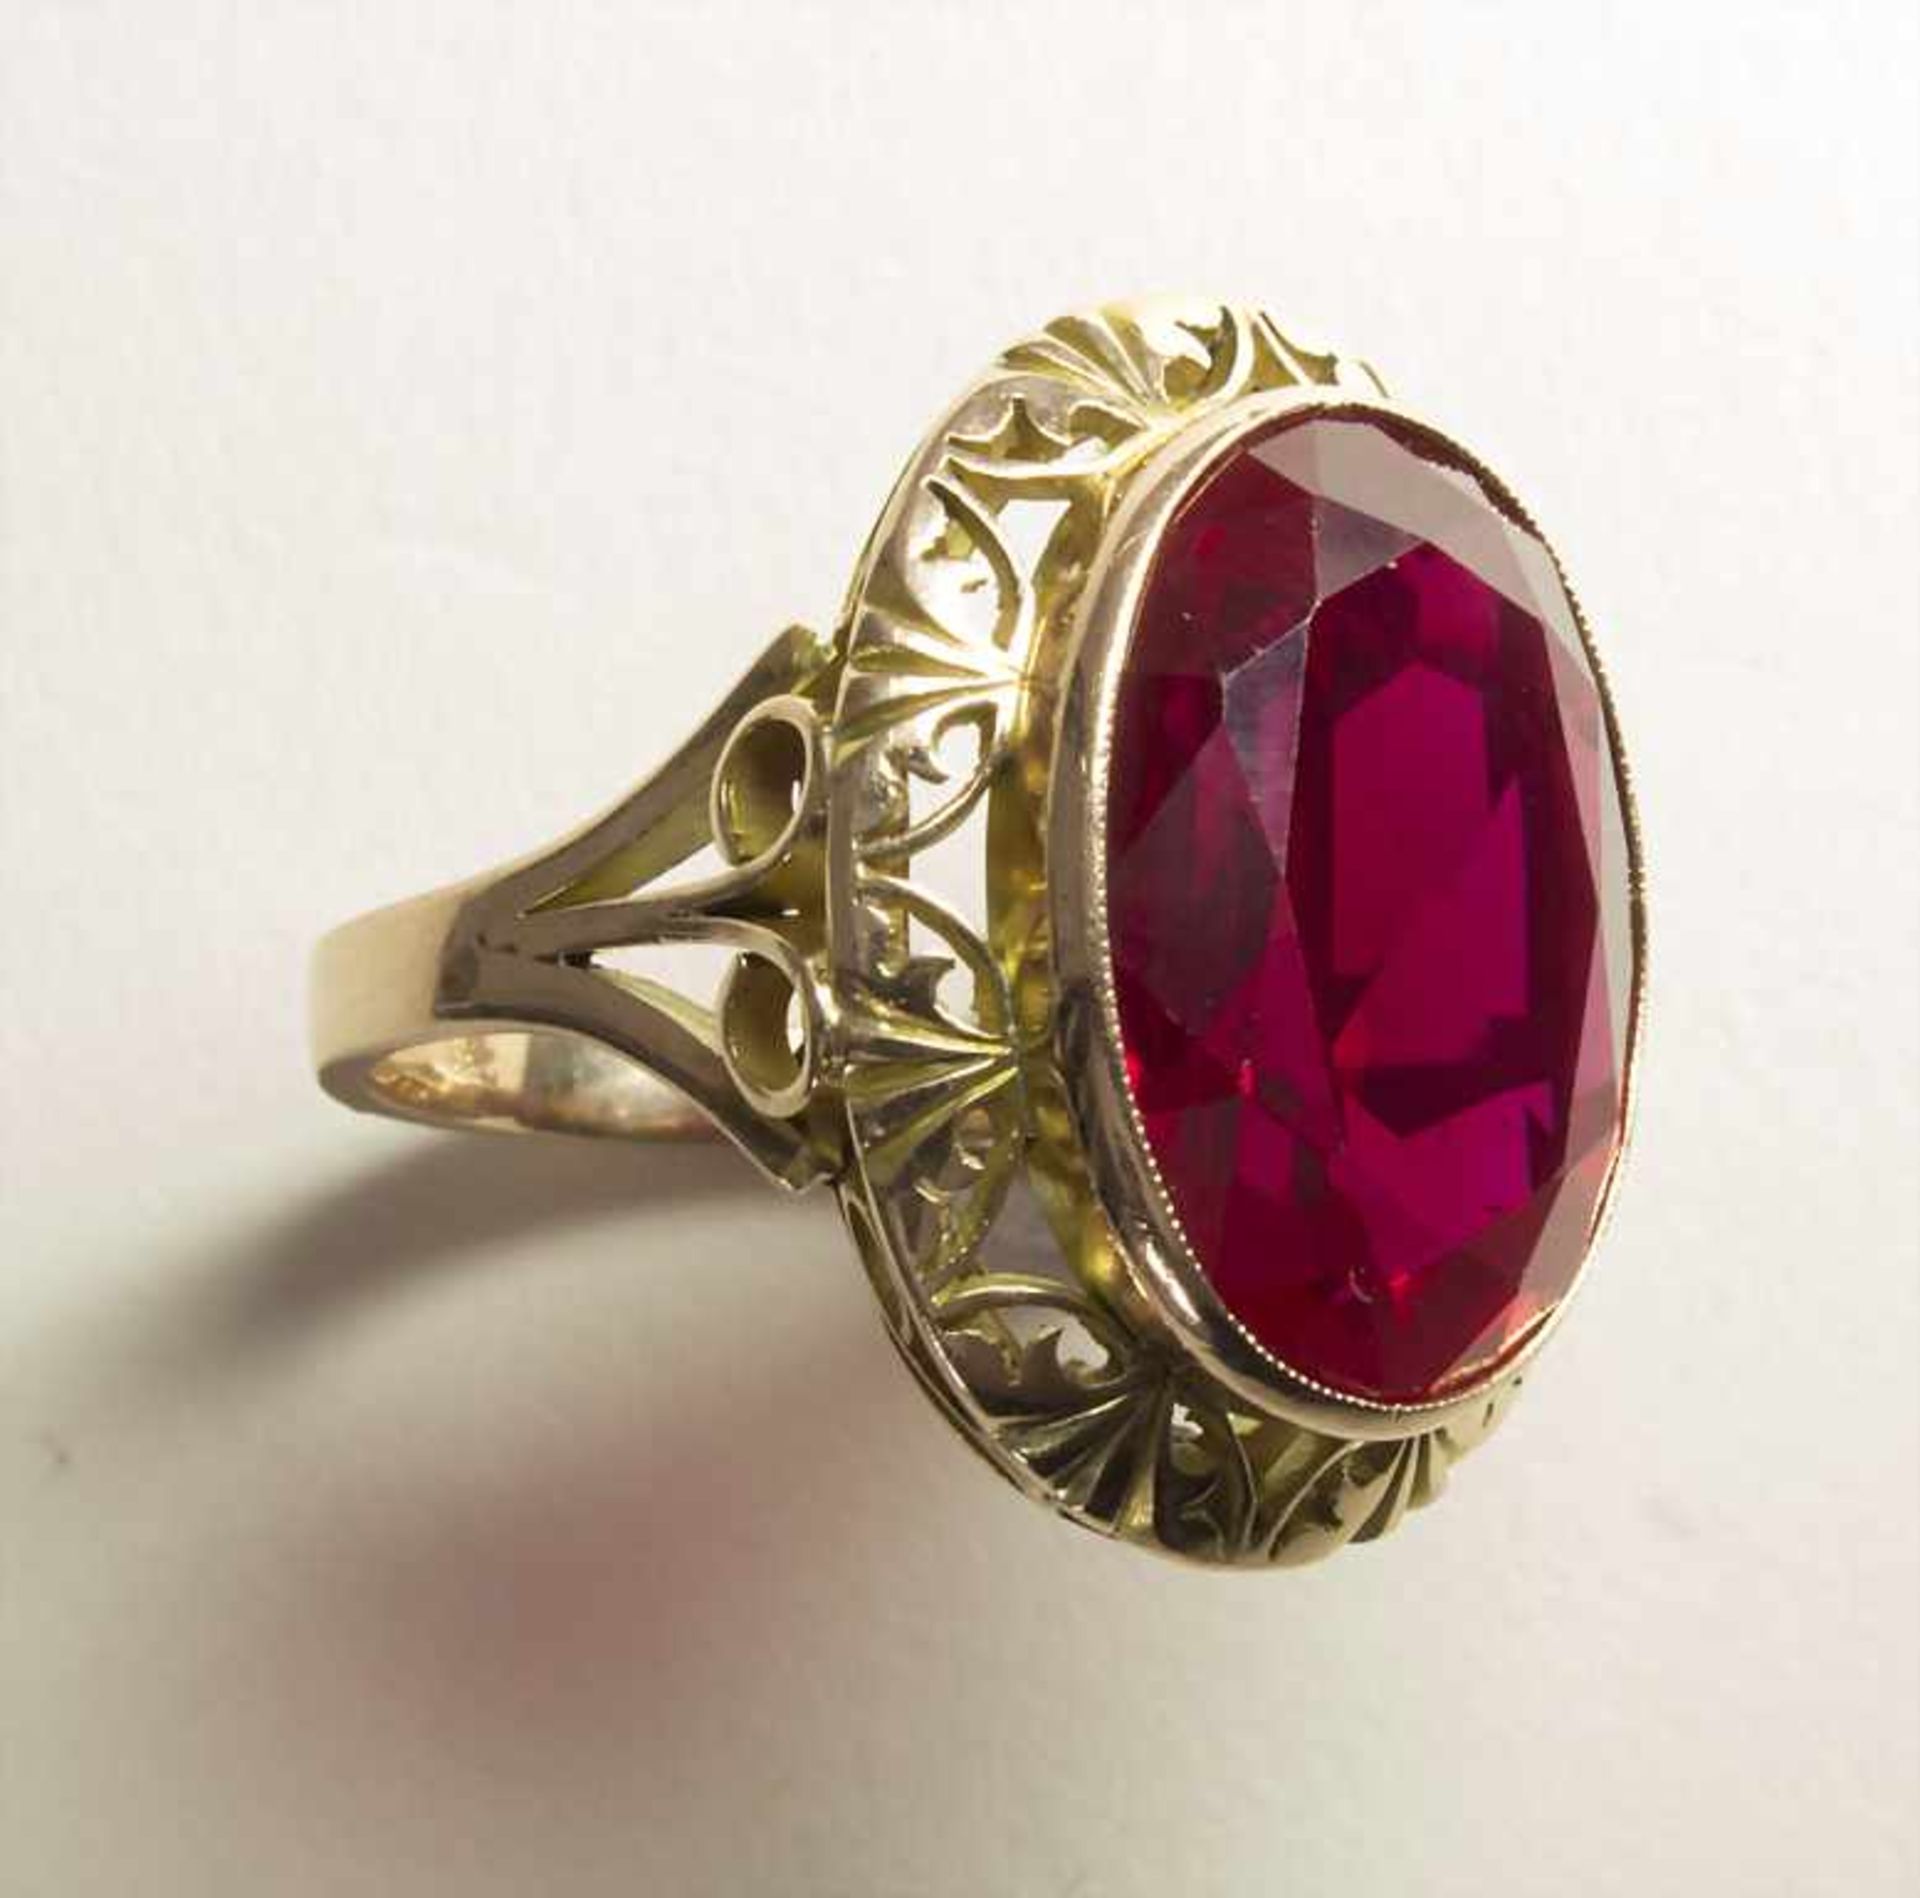 Damenring mit Farbstein / A ladies ring with red stone